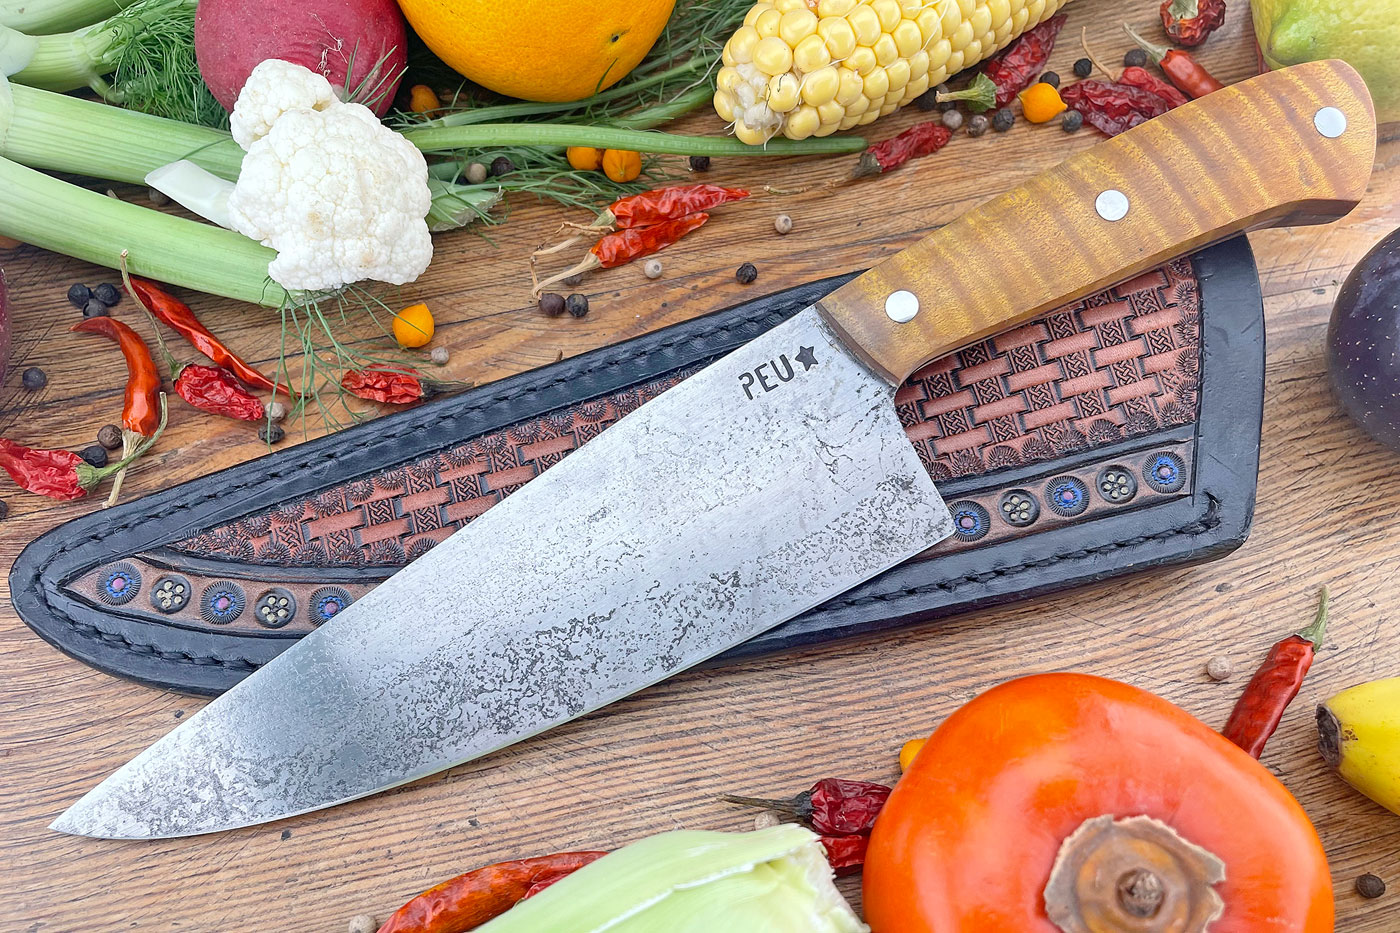 Chef's Knife (Cocinero 180mm) with Curly Maple and O2 Carbon Steel